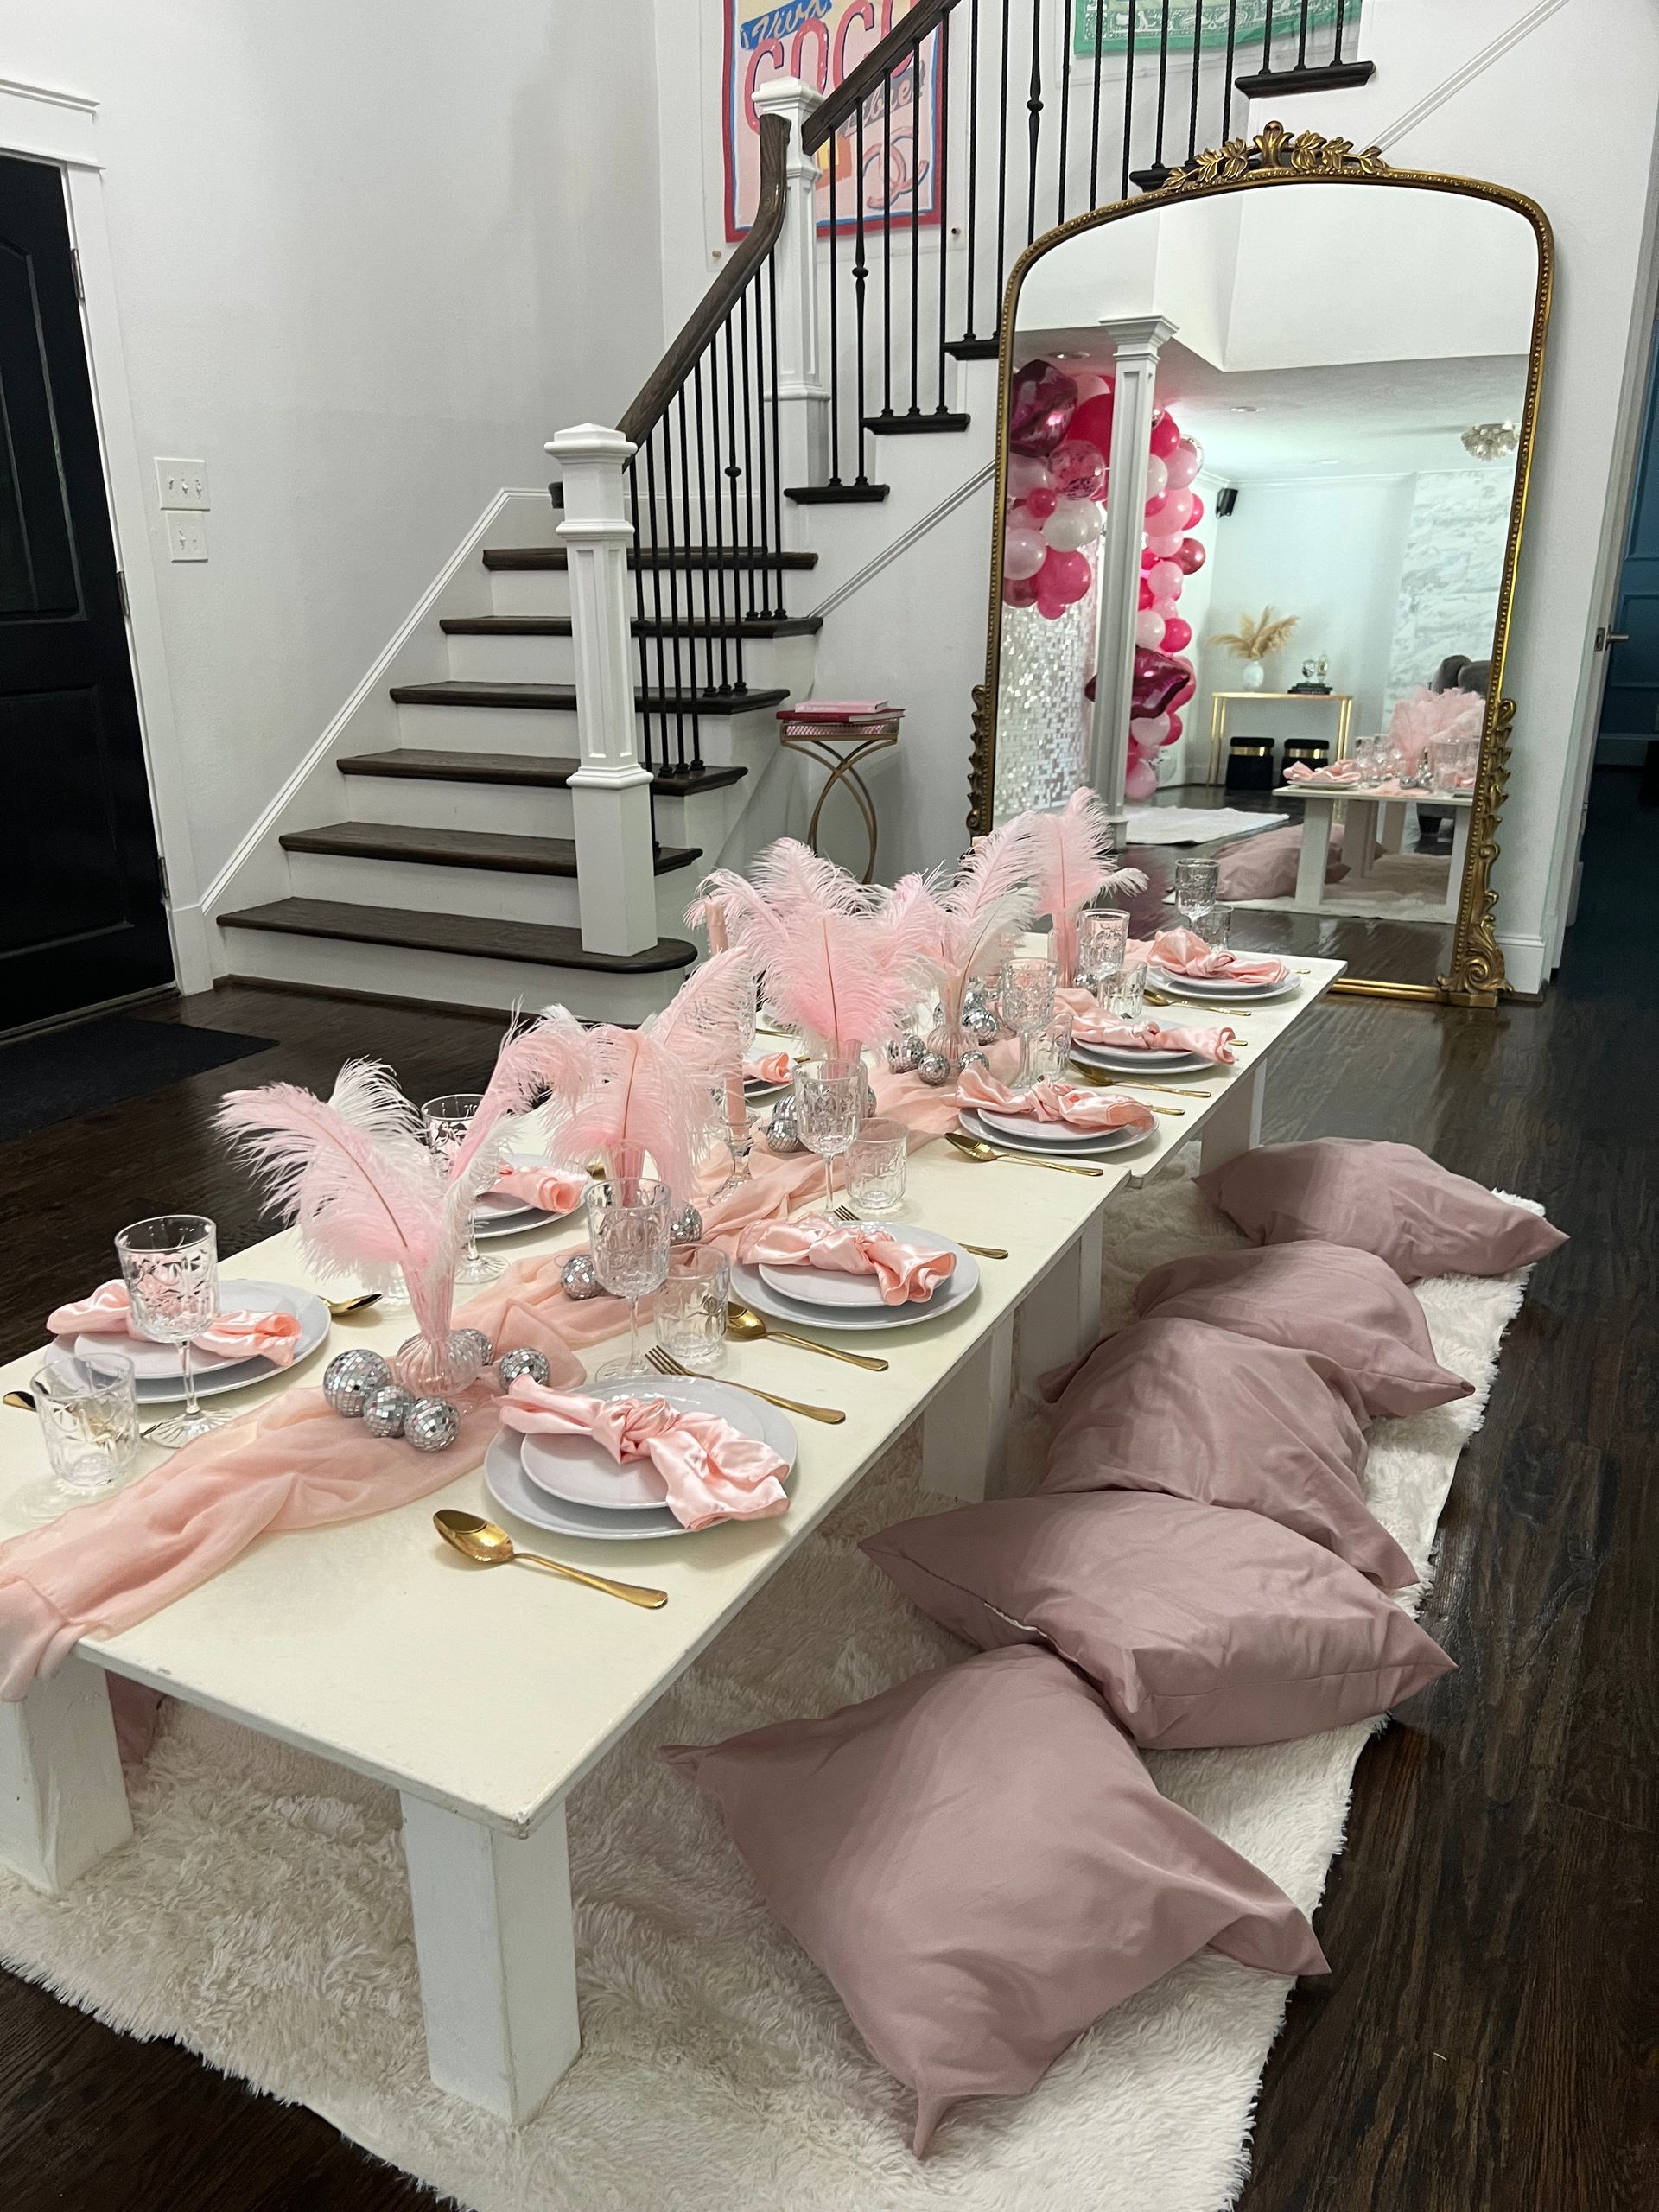 Baby Pink Burlesque Picnic Set Up image 7